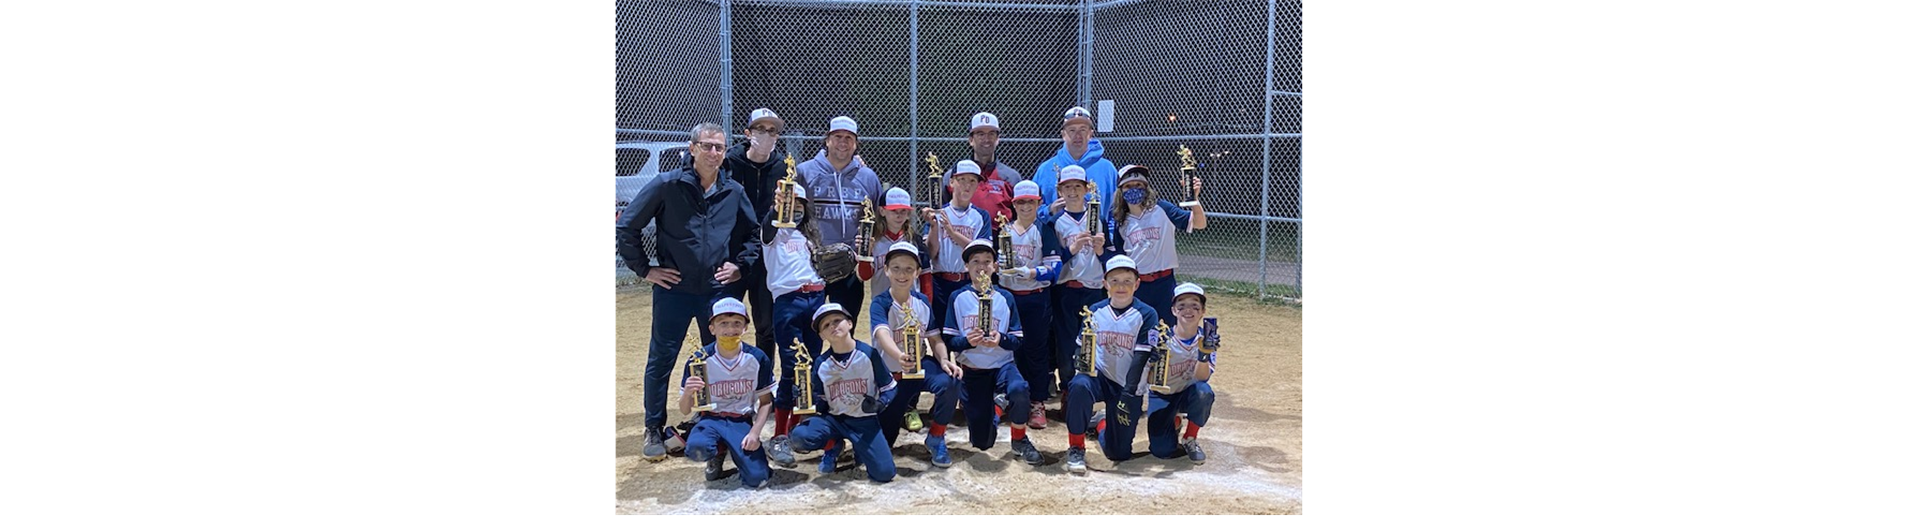 Philly Dragons 10U Sweep the GMG 1st Annual Fall Fest!